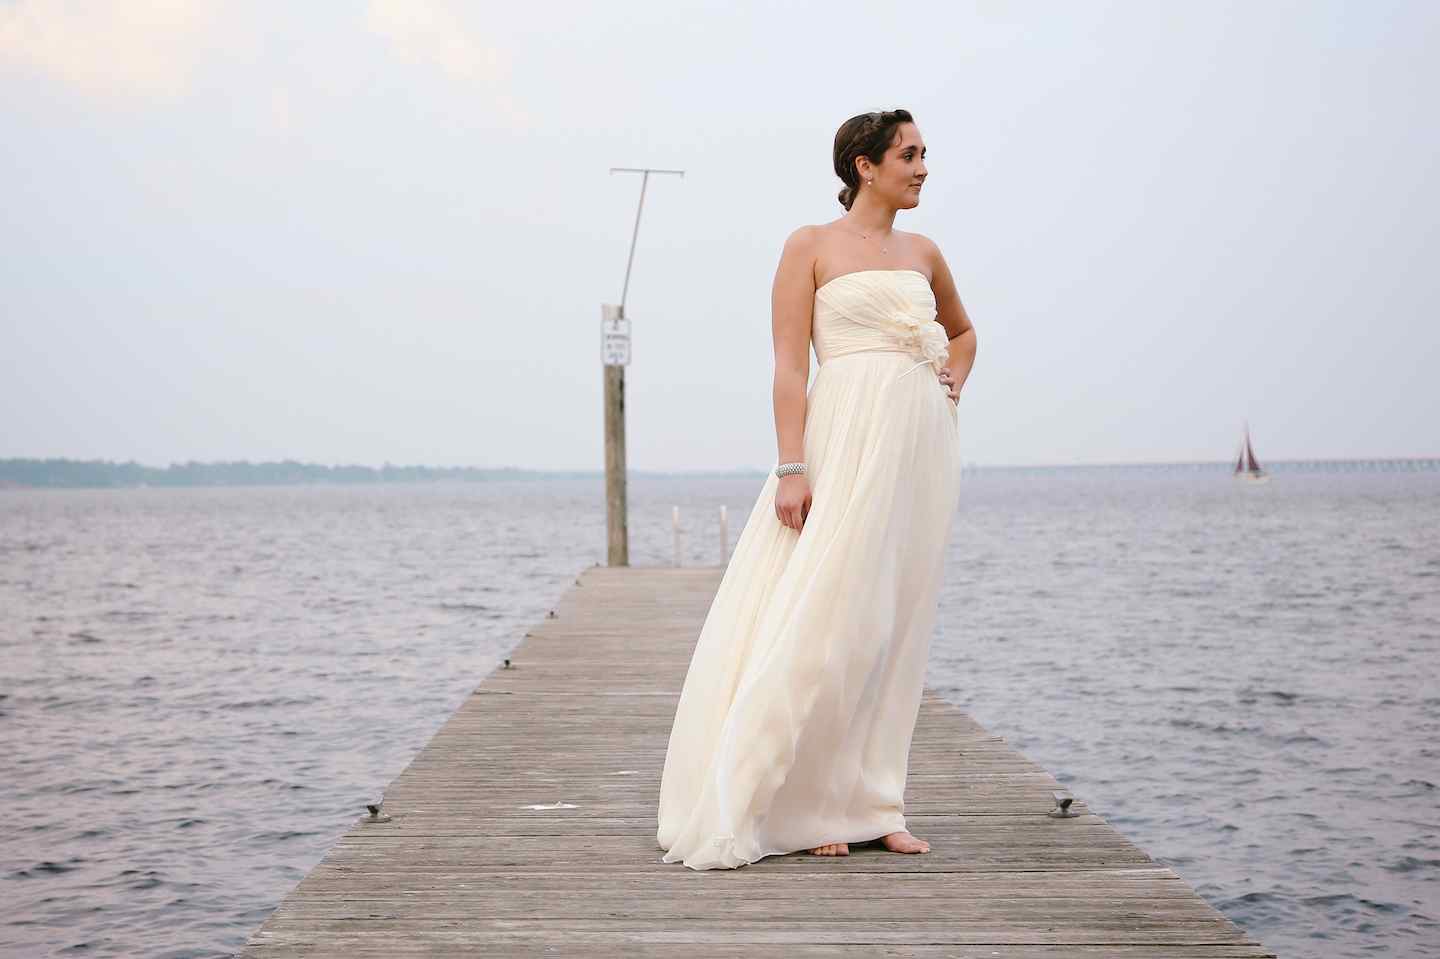 10439Bride on a Boat